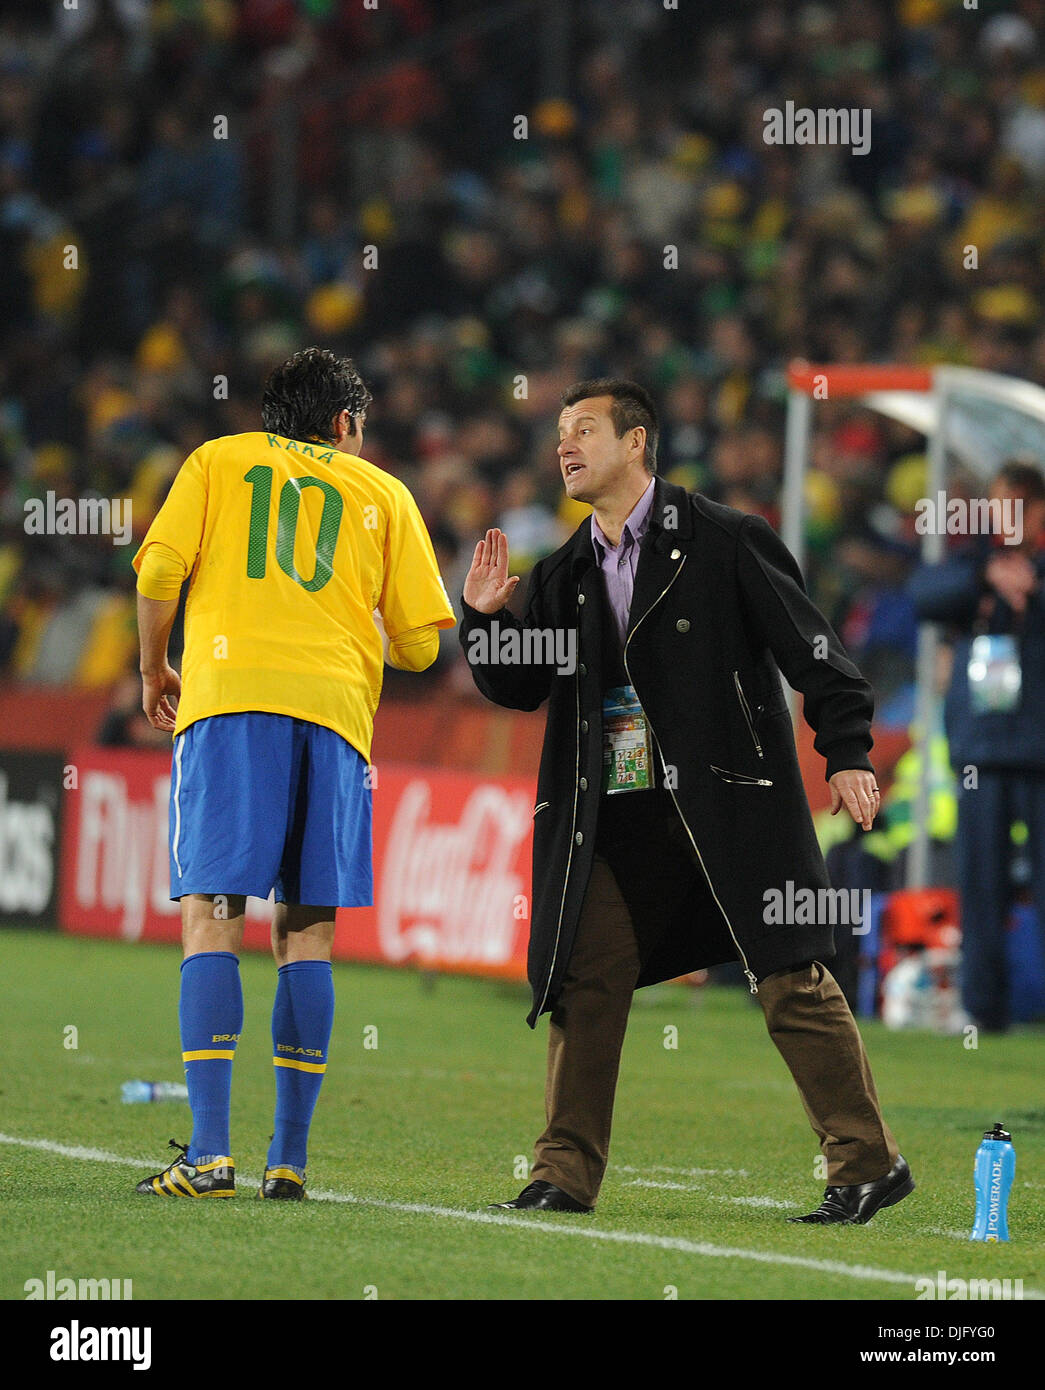 June 28, 2010 - Johannesburg, South Africa - Carlos Dunga, coach of Brazil talks to Kaka during the 2010 FIFA World Cup soccer match between Brazil and Chile at Ellis Park Stadium on June 28, 2010 in Johannesburg, South Africa. (Credit Image: © Luca Ghidoni/ZUMApress.com) Stock Photo